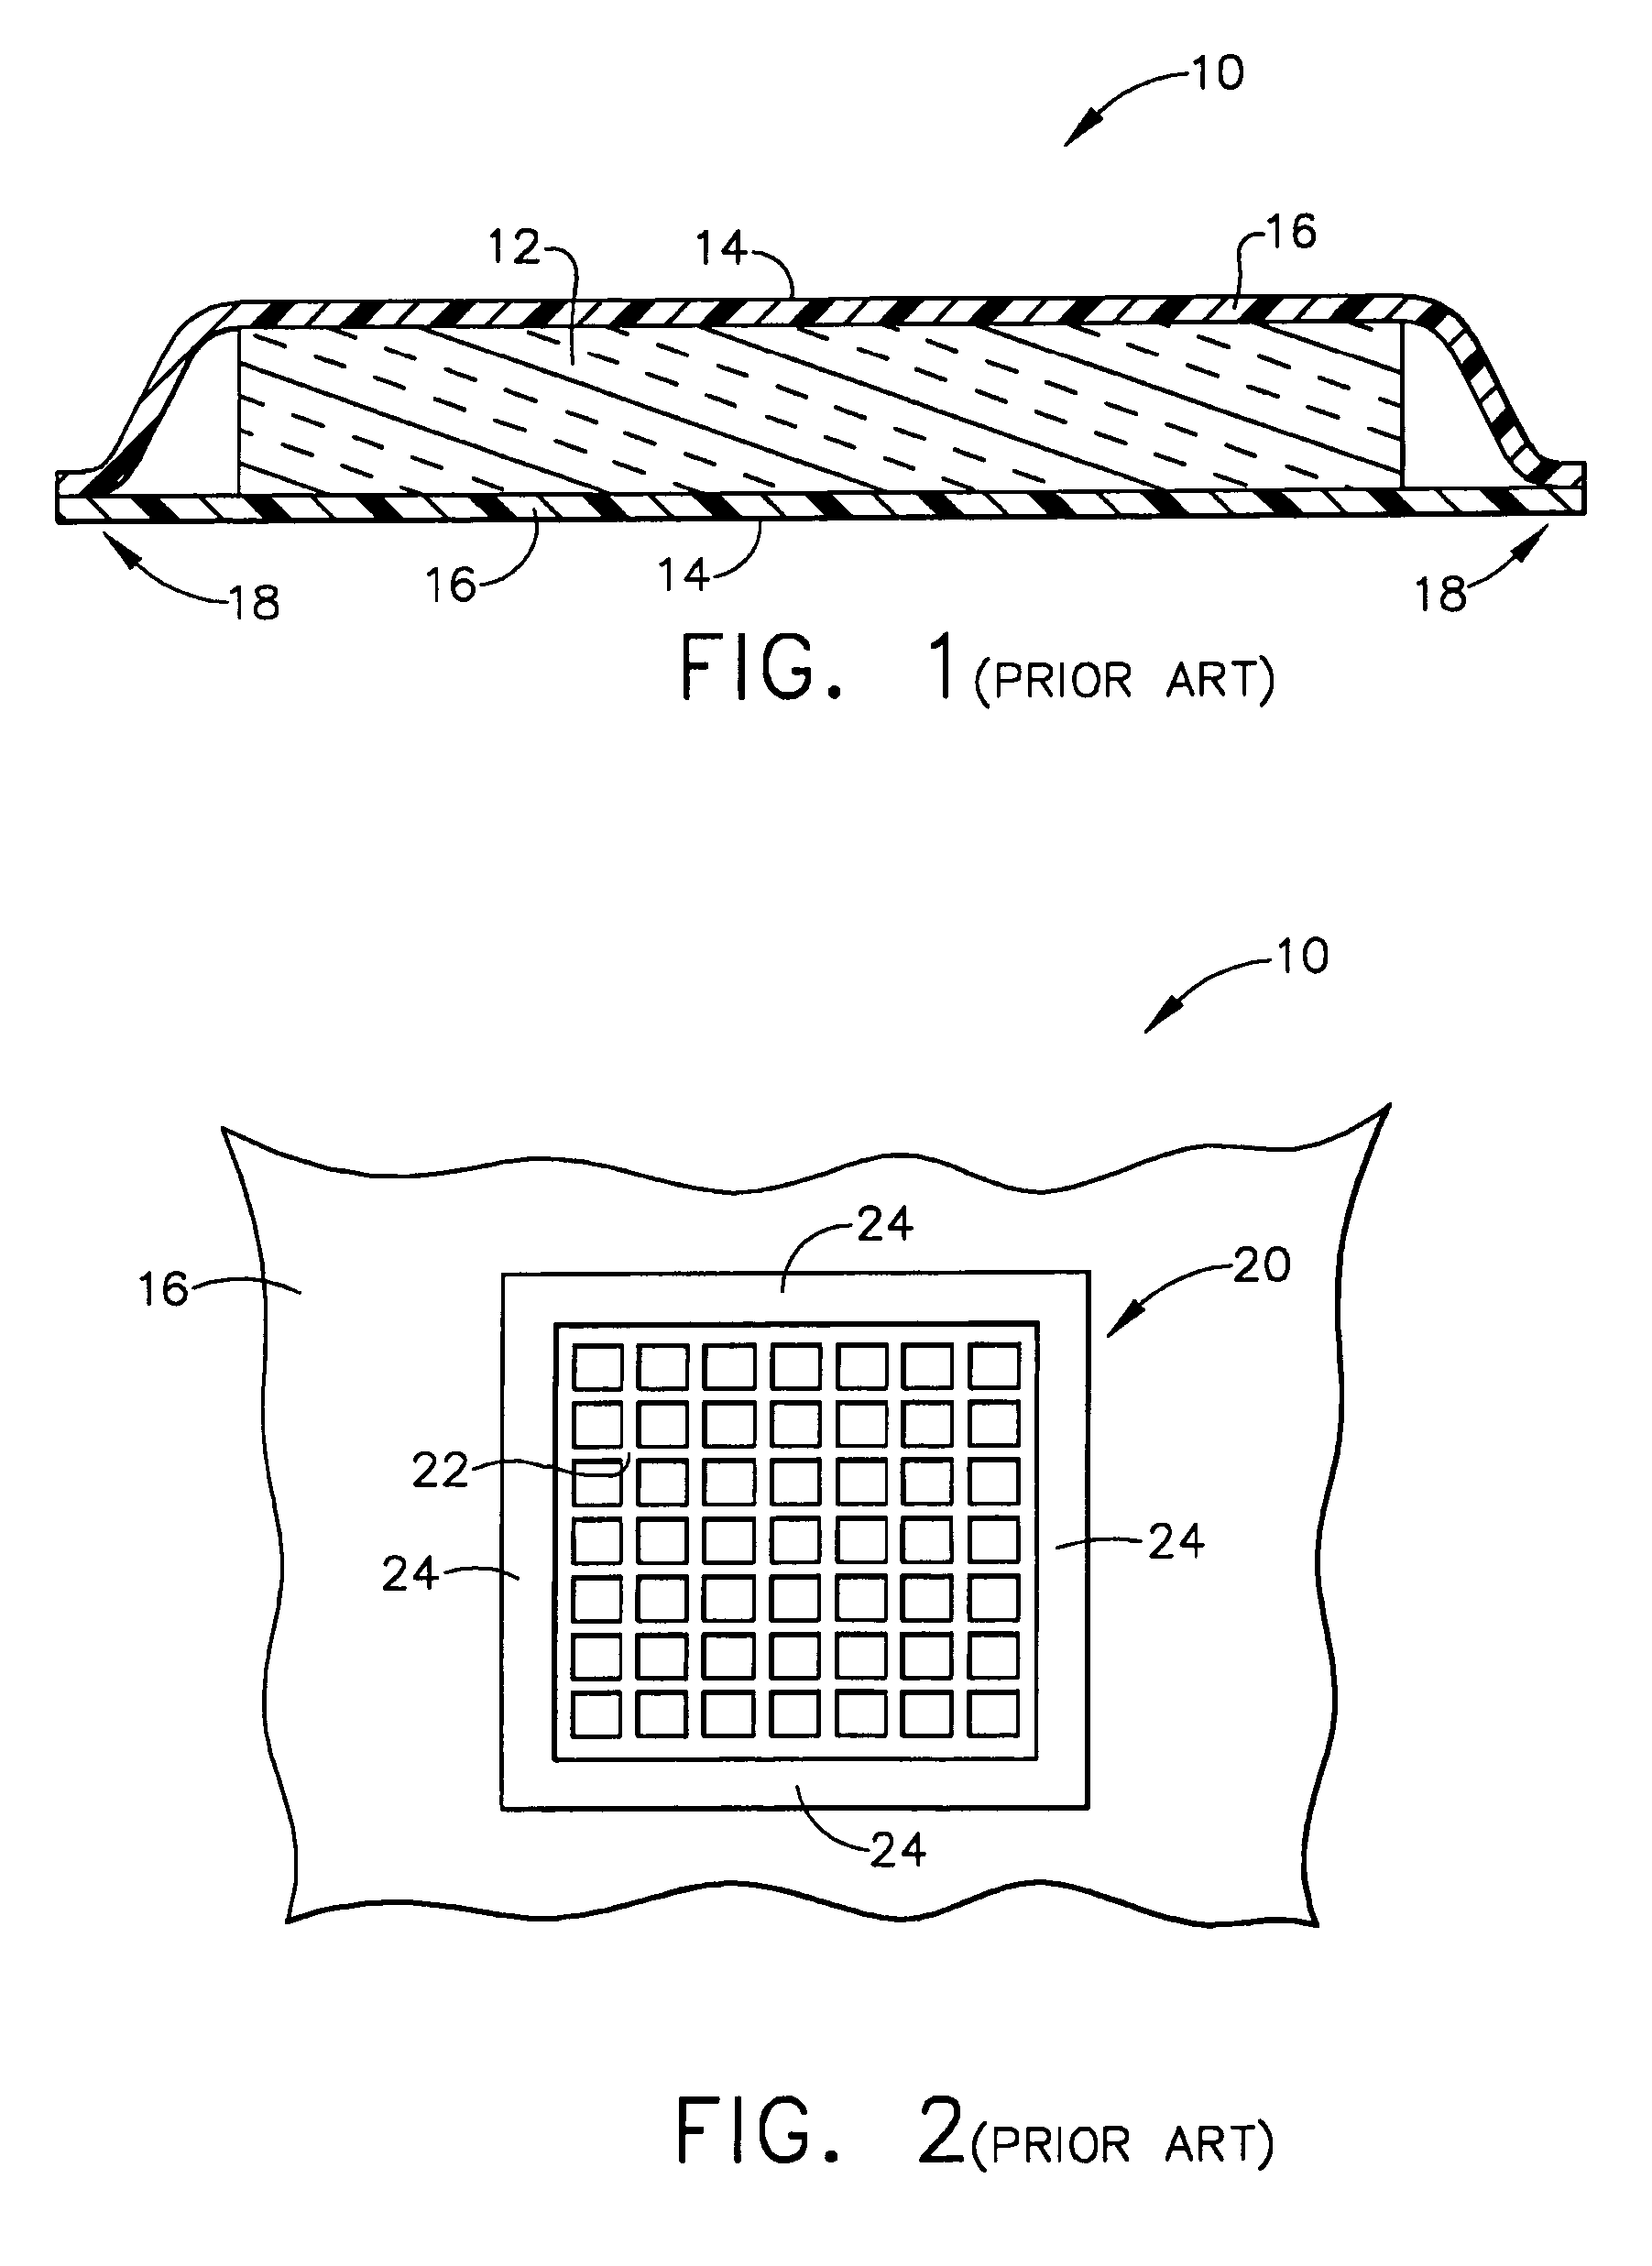 Modularized insulation, systems, apparatus, and methods